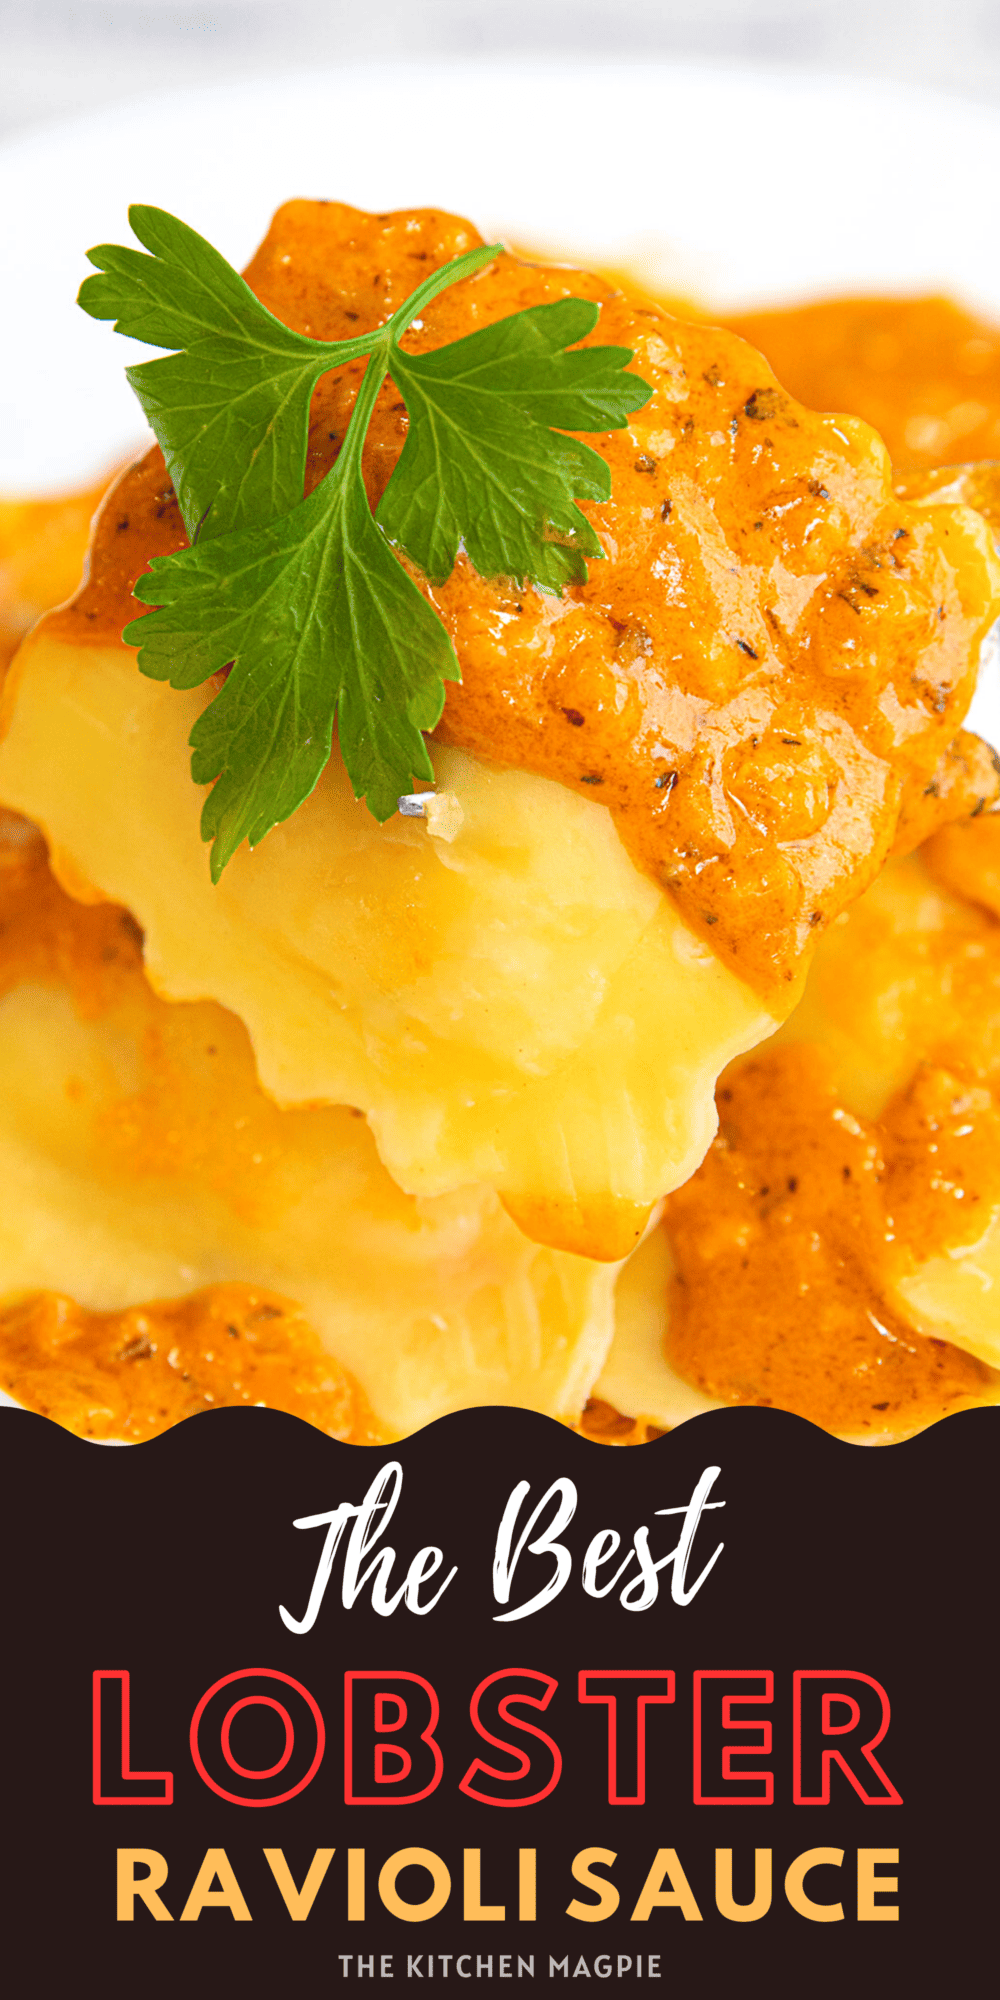 How to make a creamy, decadent lobster ravioli sauce! You can omit the tomato paste and have a simple white sauce, or keep it and the sauce is a rosé. The choice is up to you!